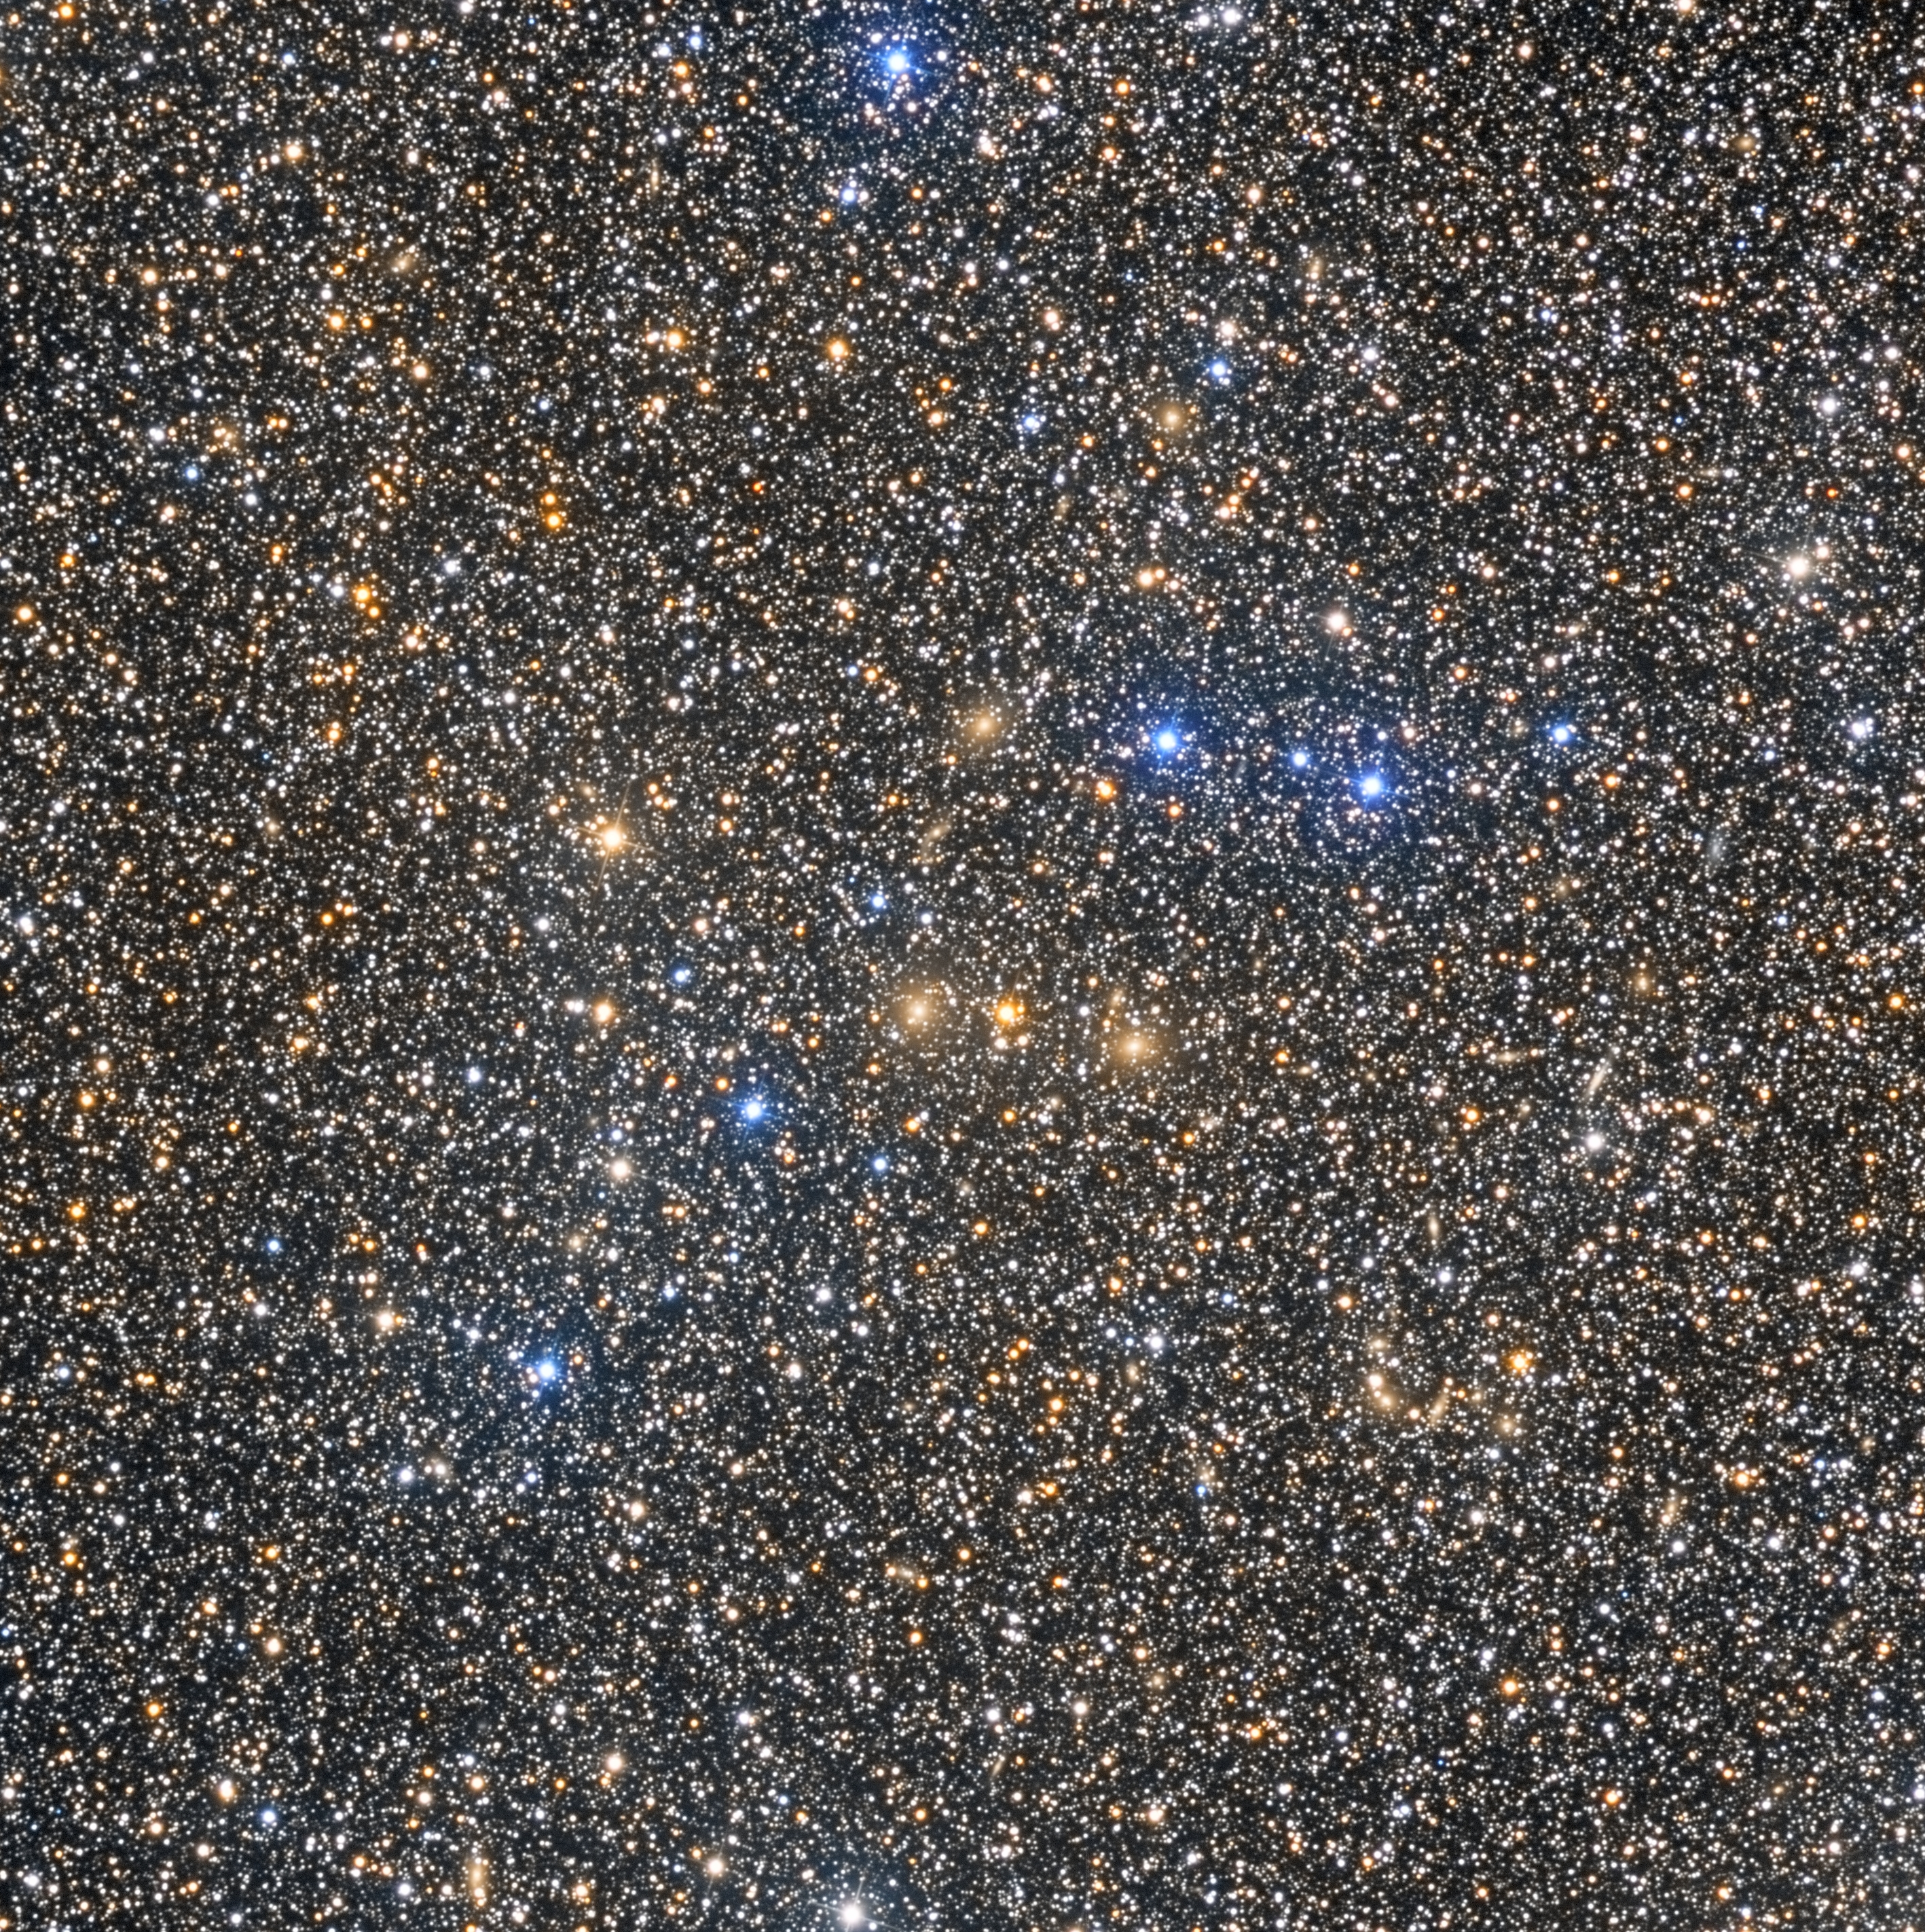 Abell 3627